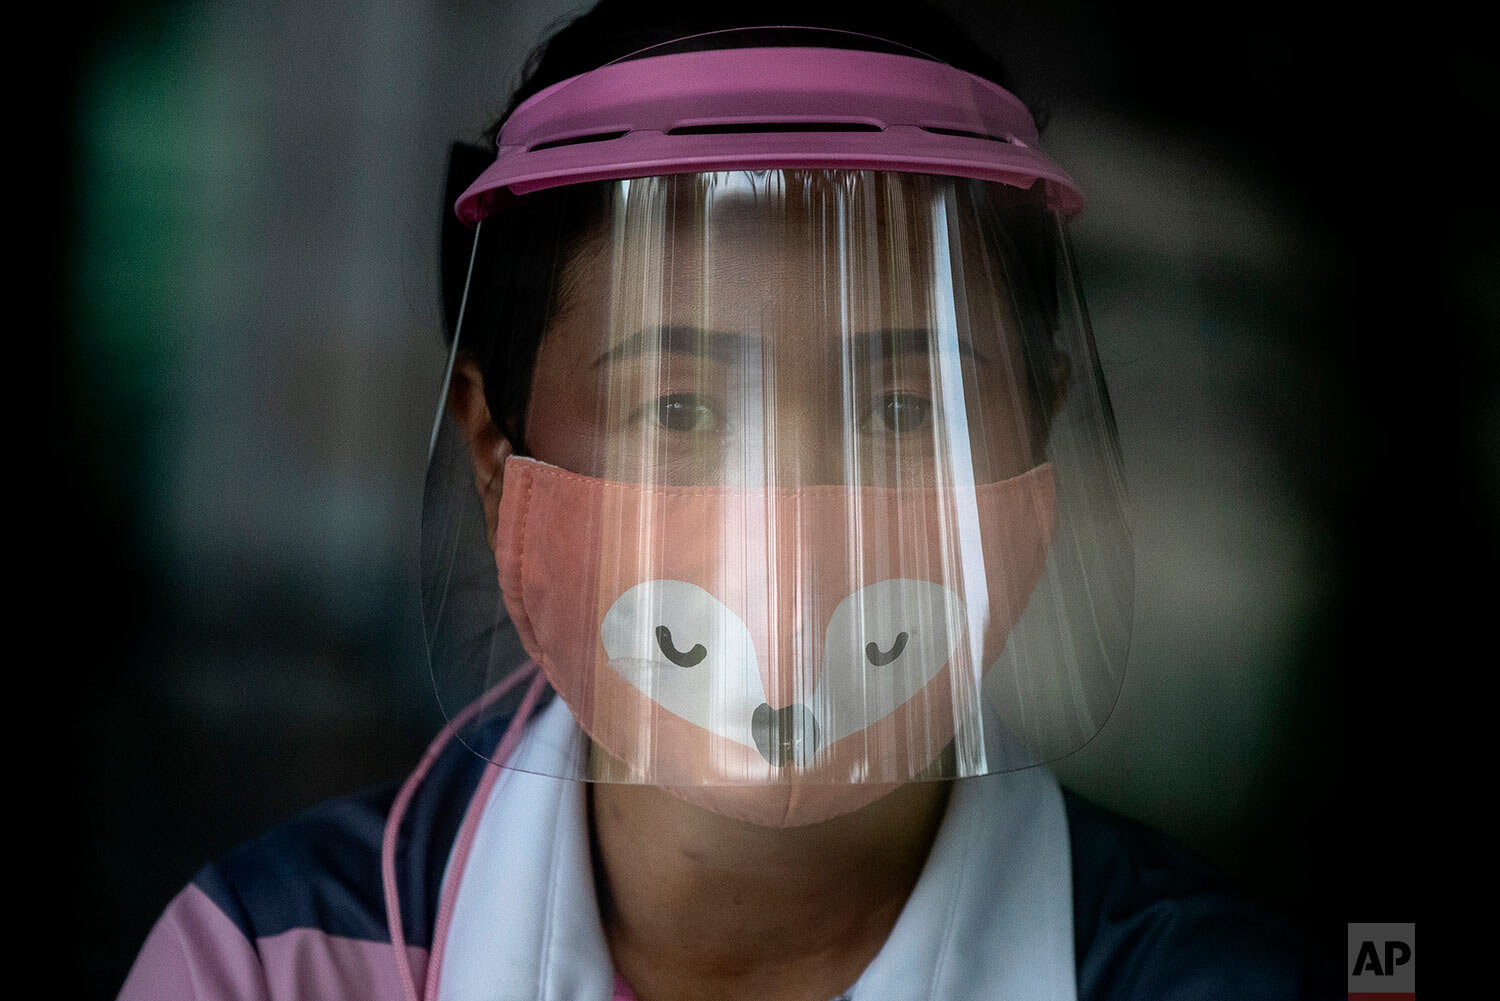  A volunteer wearing a face shield and mask manages a counter of COVID-19 infection screening center at the Chulalongkorn University health service center in Bangkok, Thailand, Wednesday, April 1, 2020. (AP Photo/Gemunu Amarasinghe) 